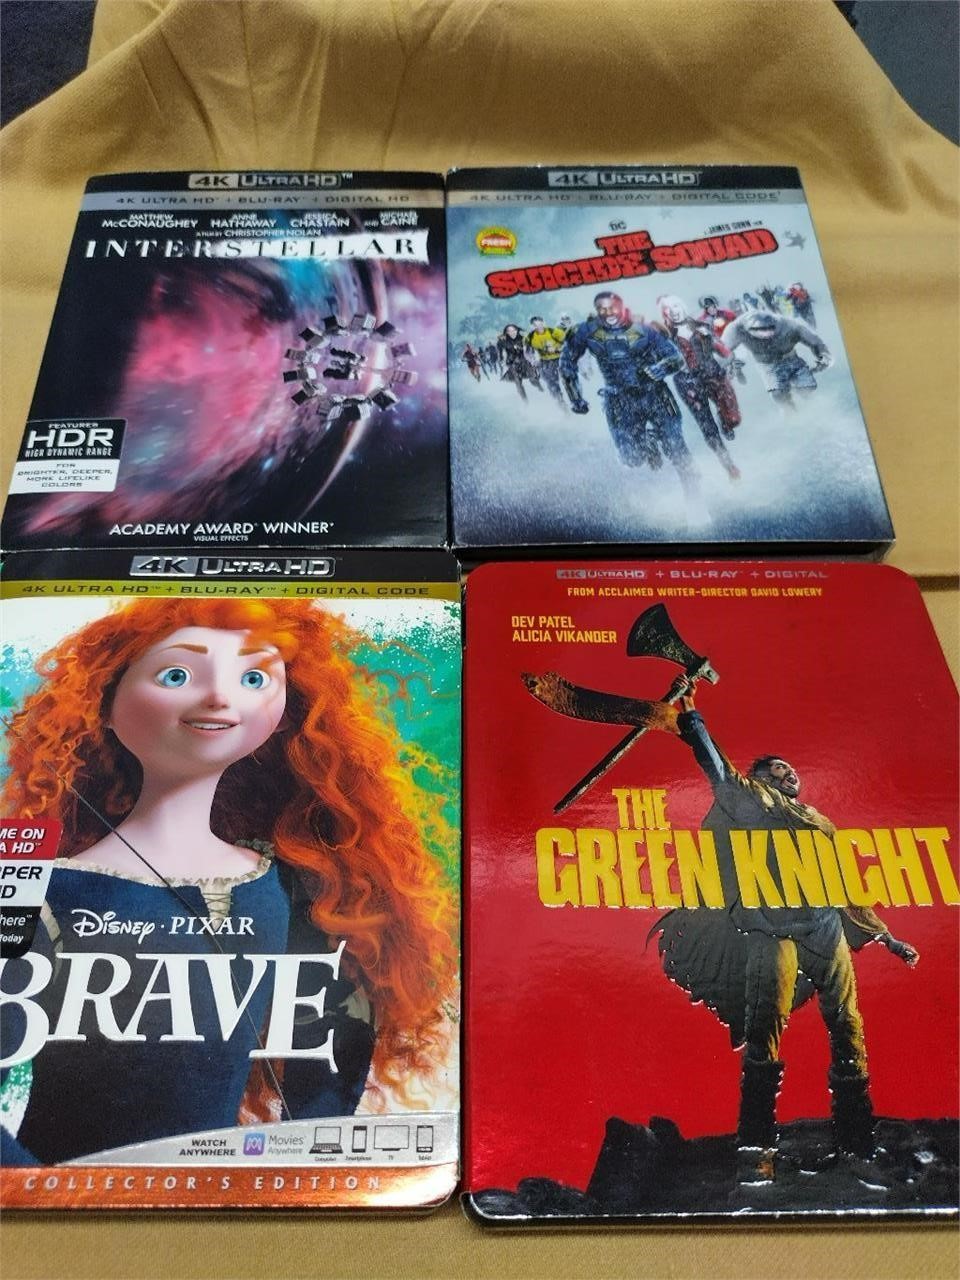 May Movies, Music and Books